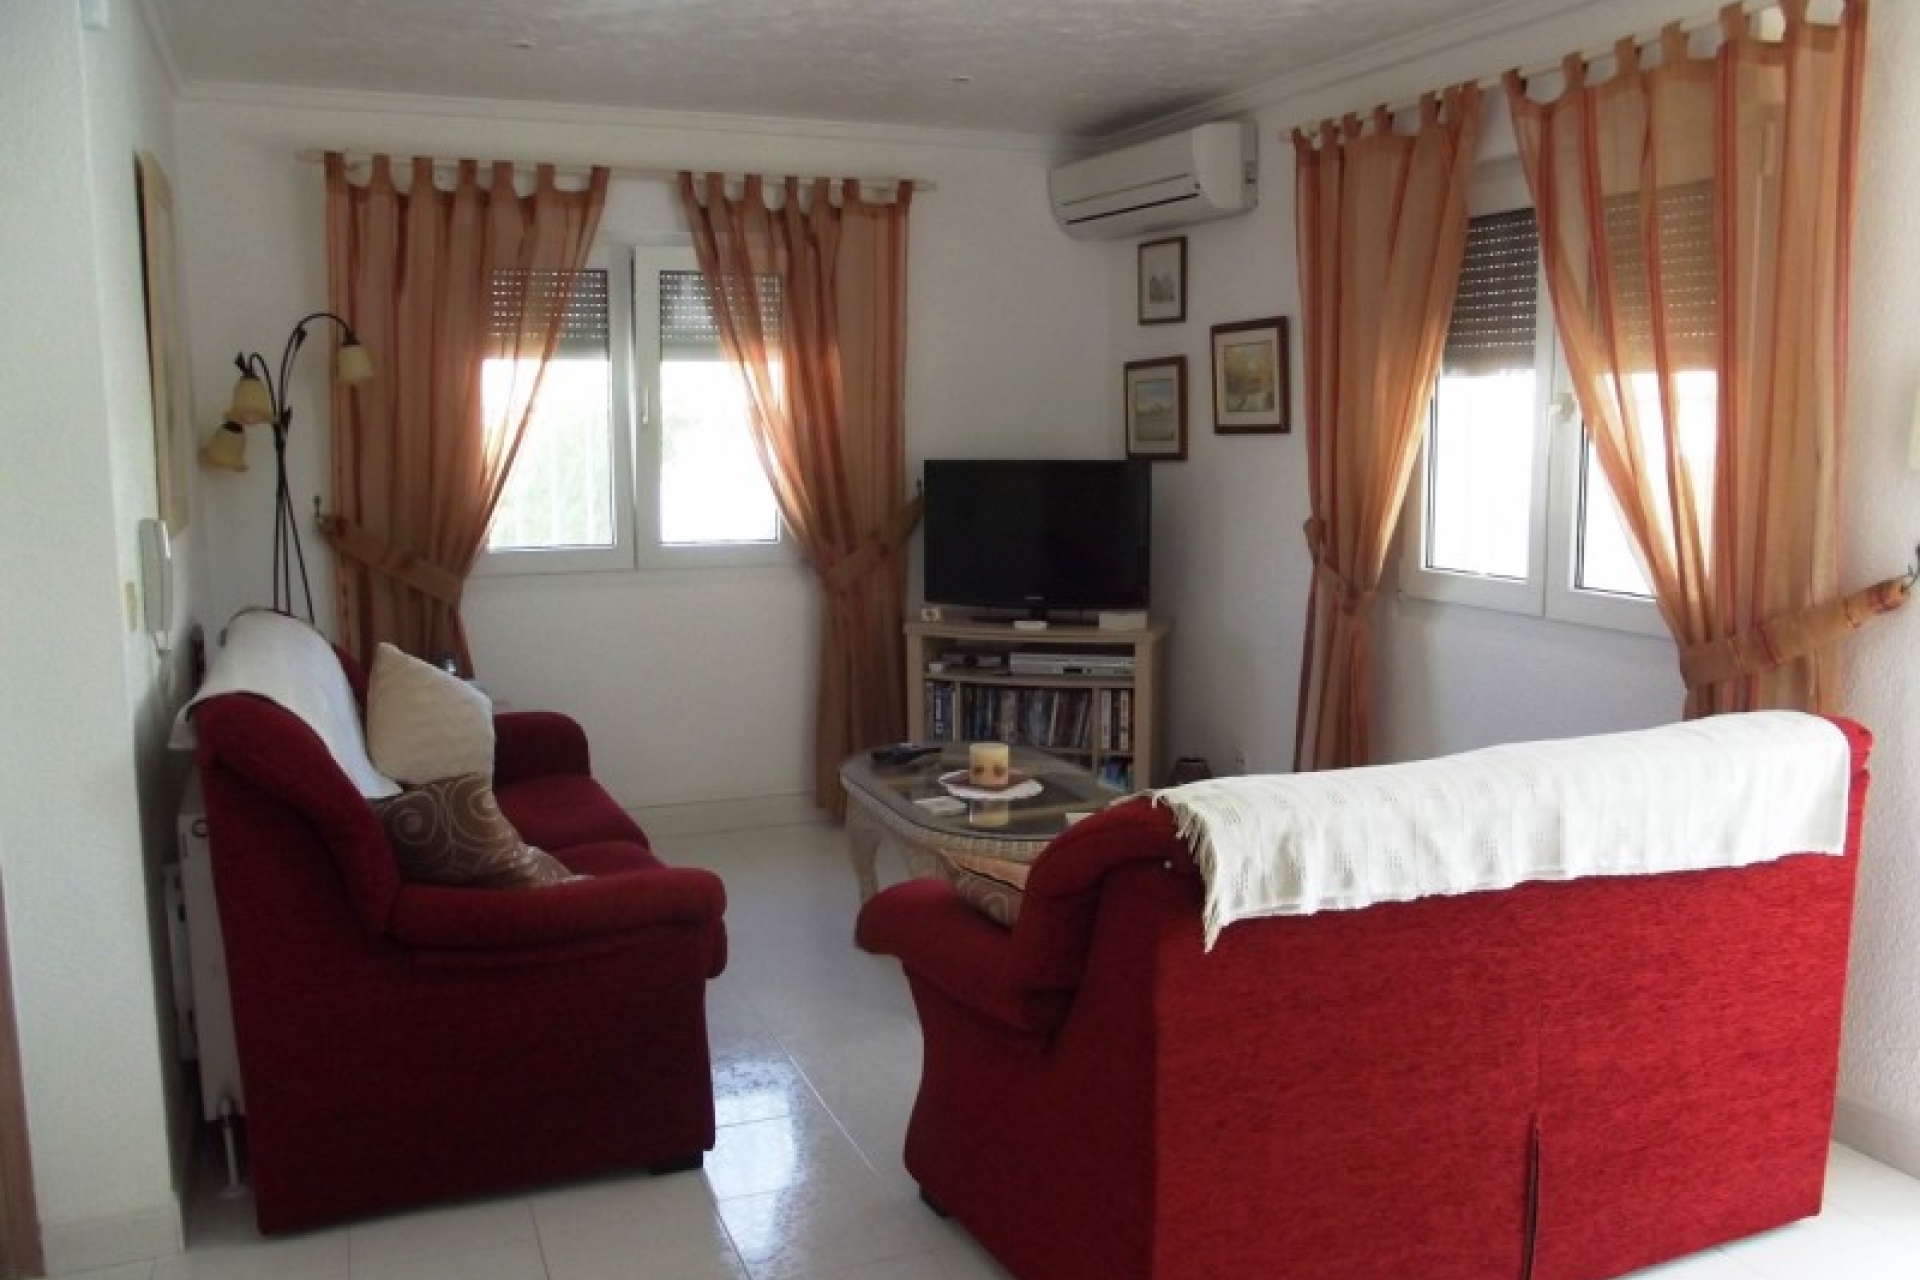 Property for sale bargain cheap Spain costa blanca